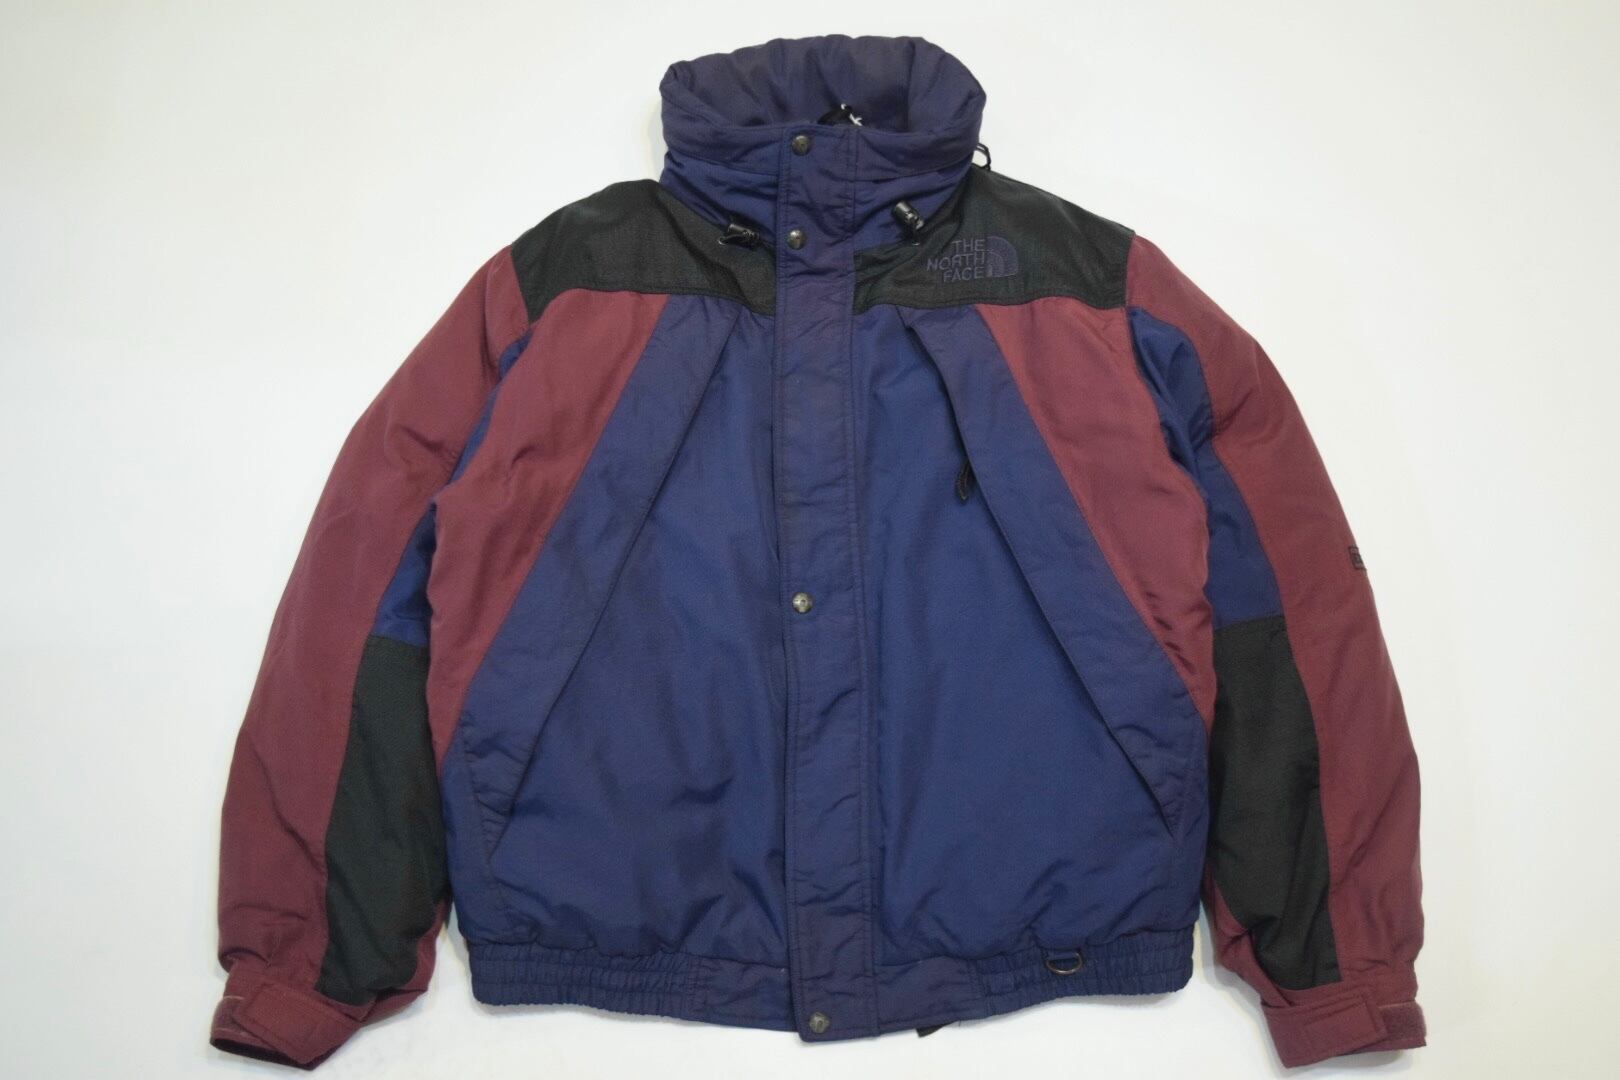 USED 90s THE NORTH FACE ”EXTREAM GEAR Series” Down Jacket -Medium 01260